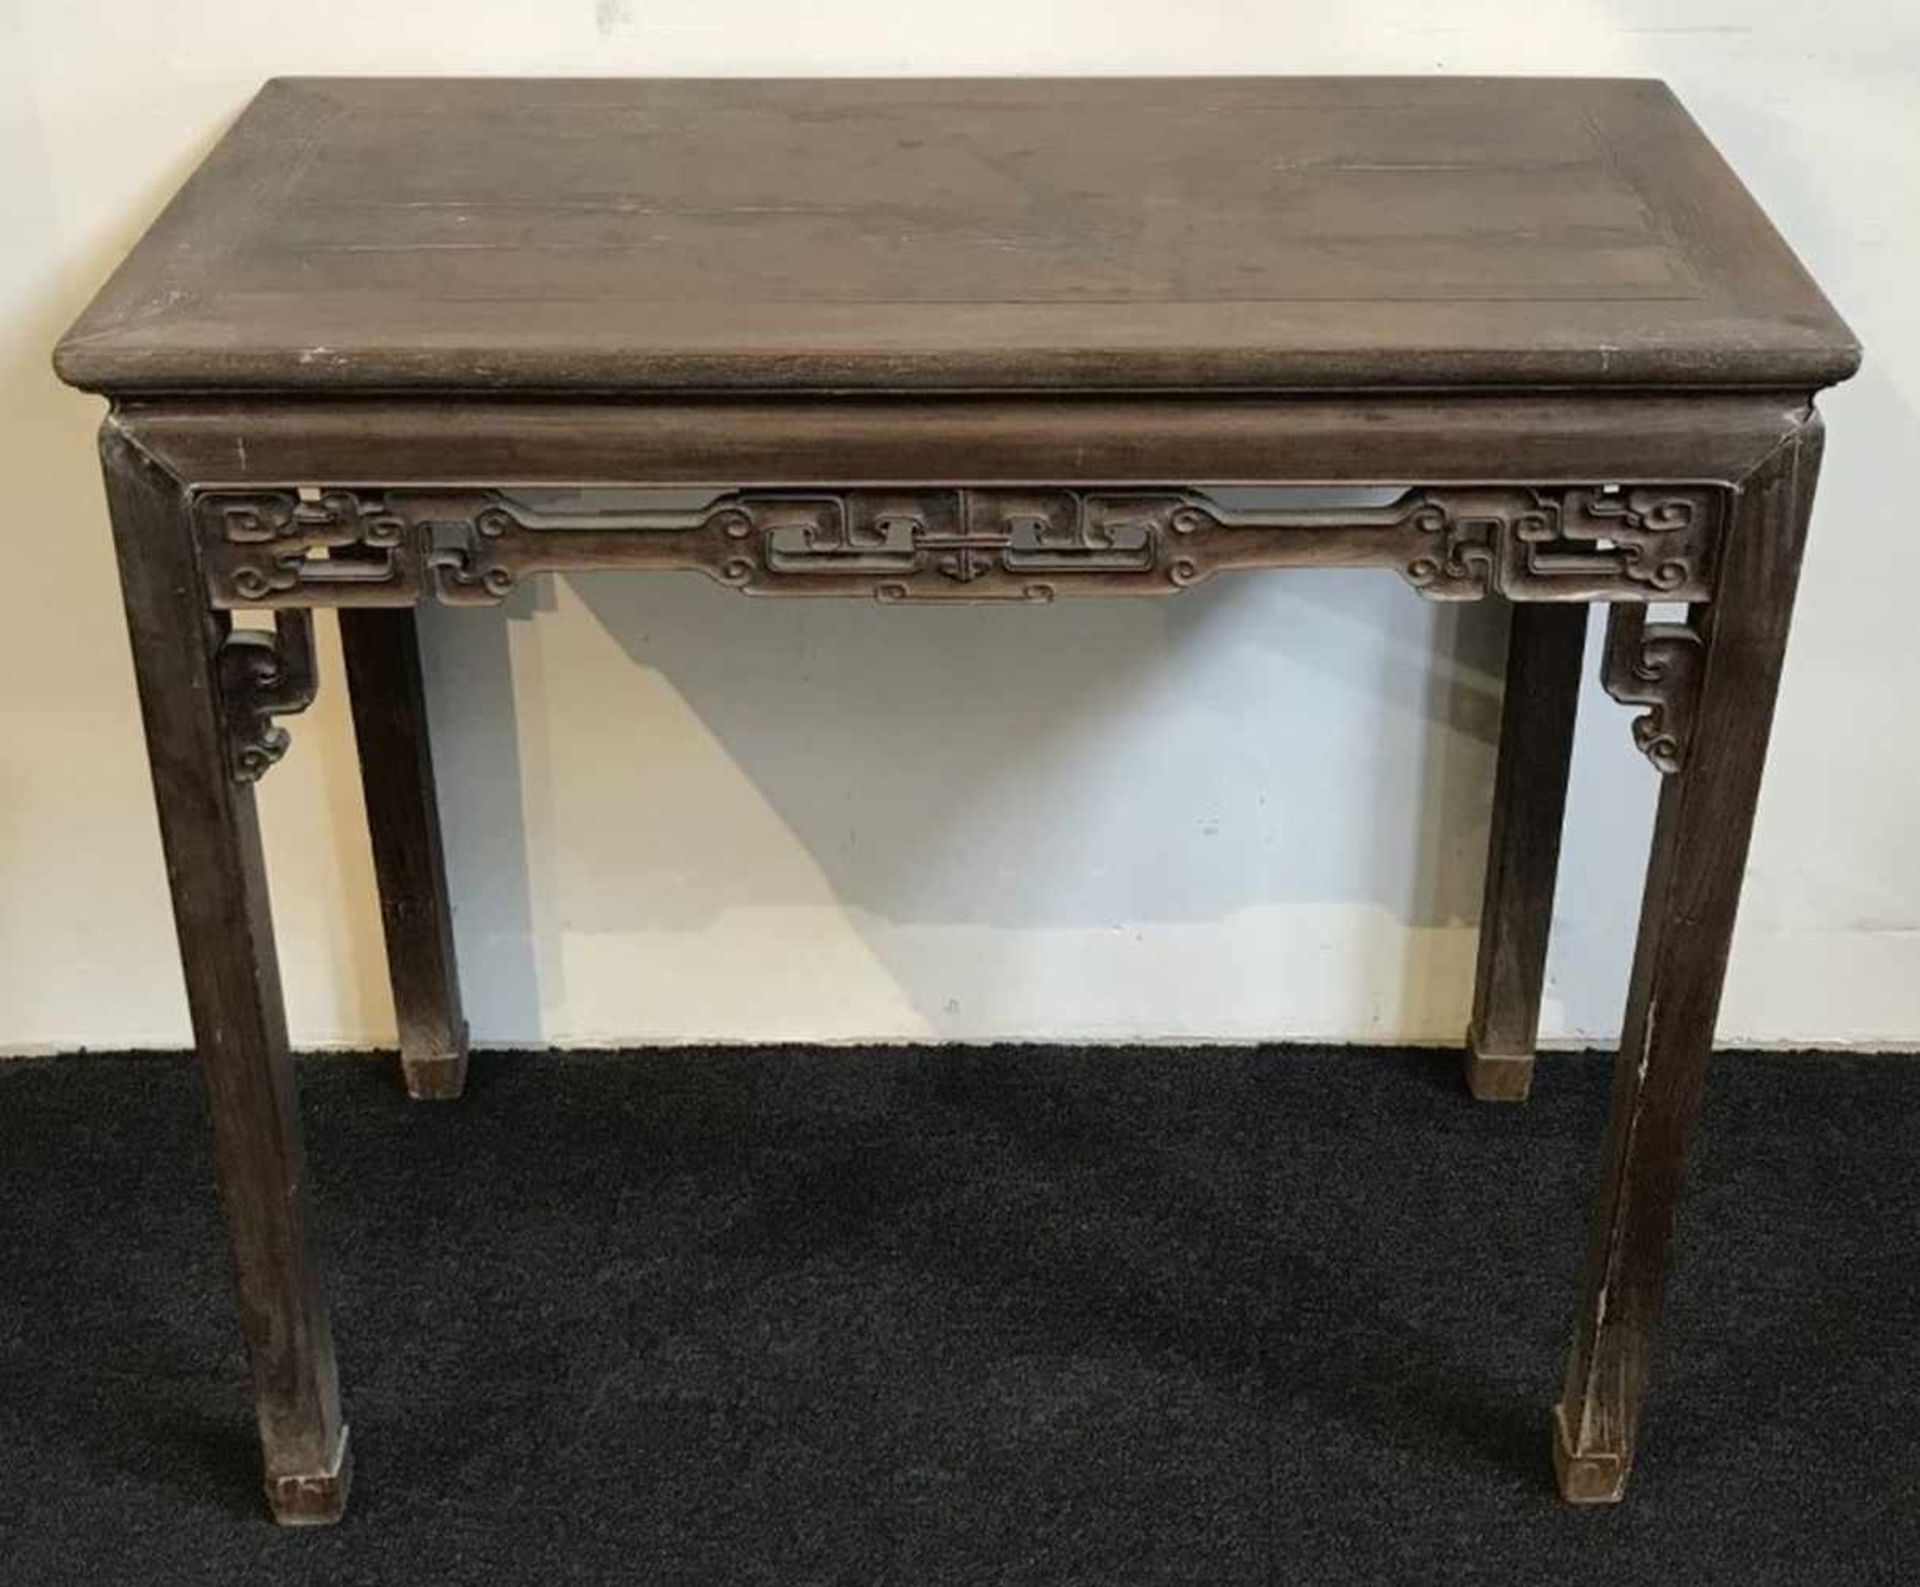 Sidetable South China, Canton19th century Qing dynasty "Blackwood" a native rosewood speciesH 86 W